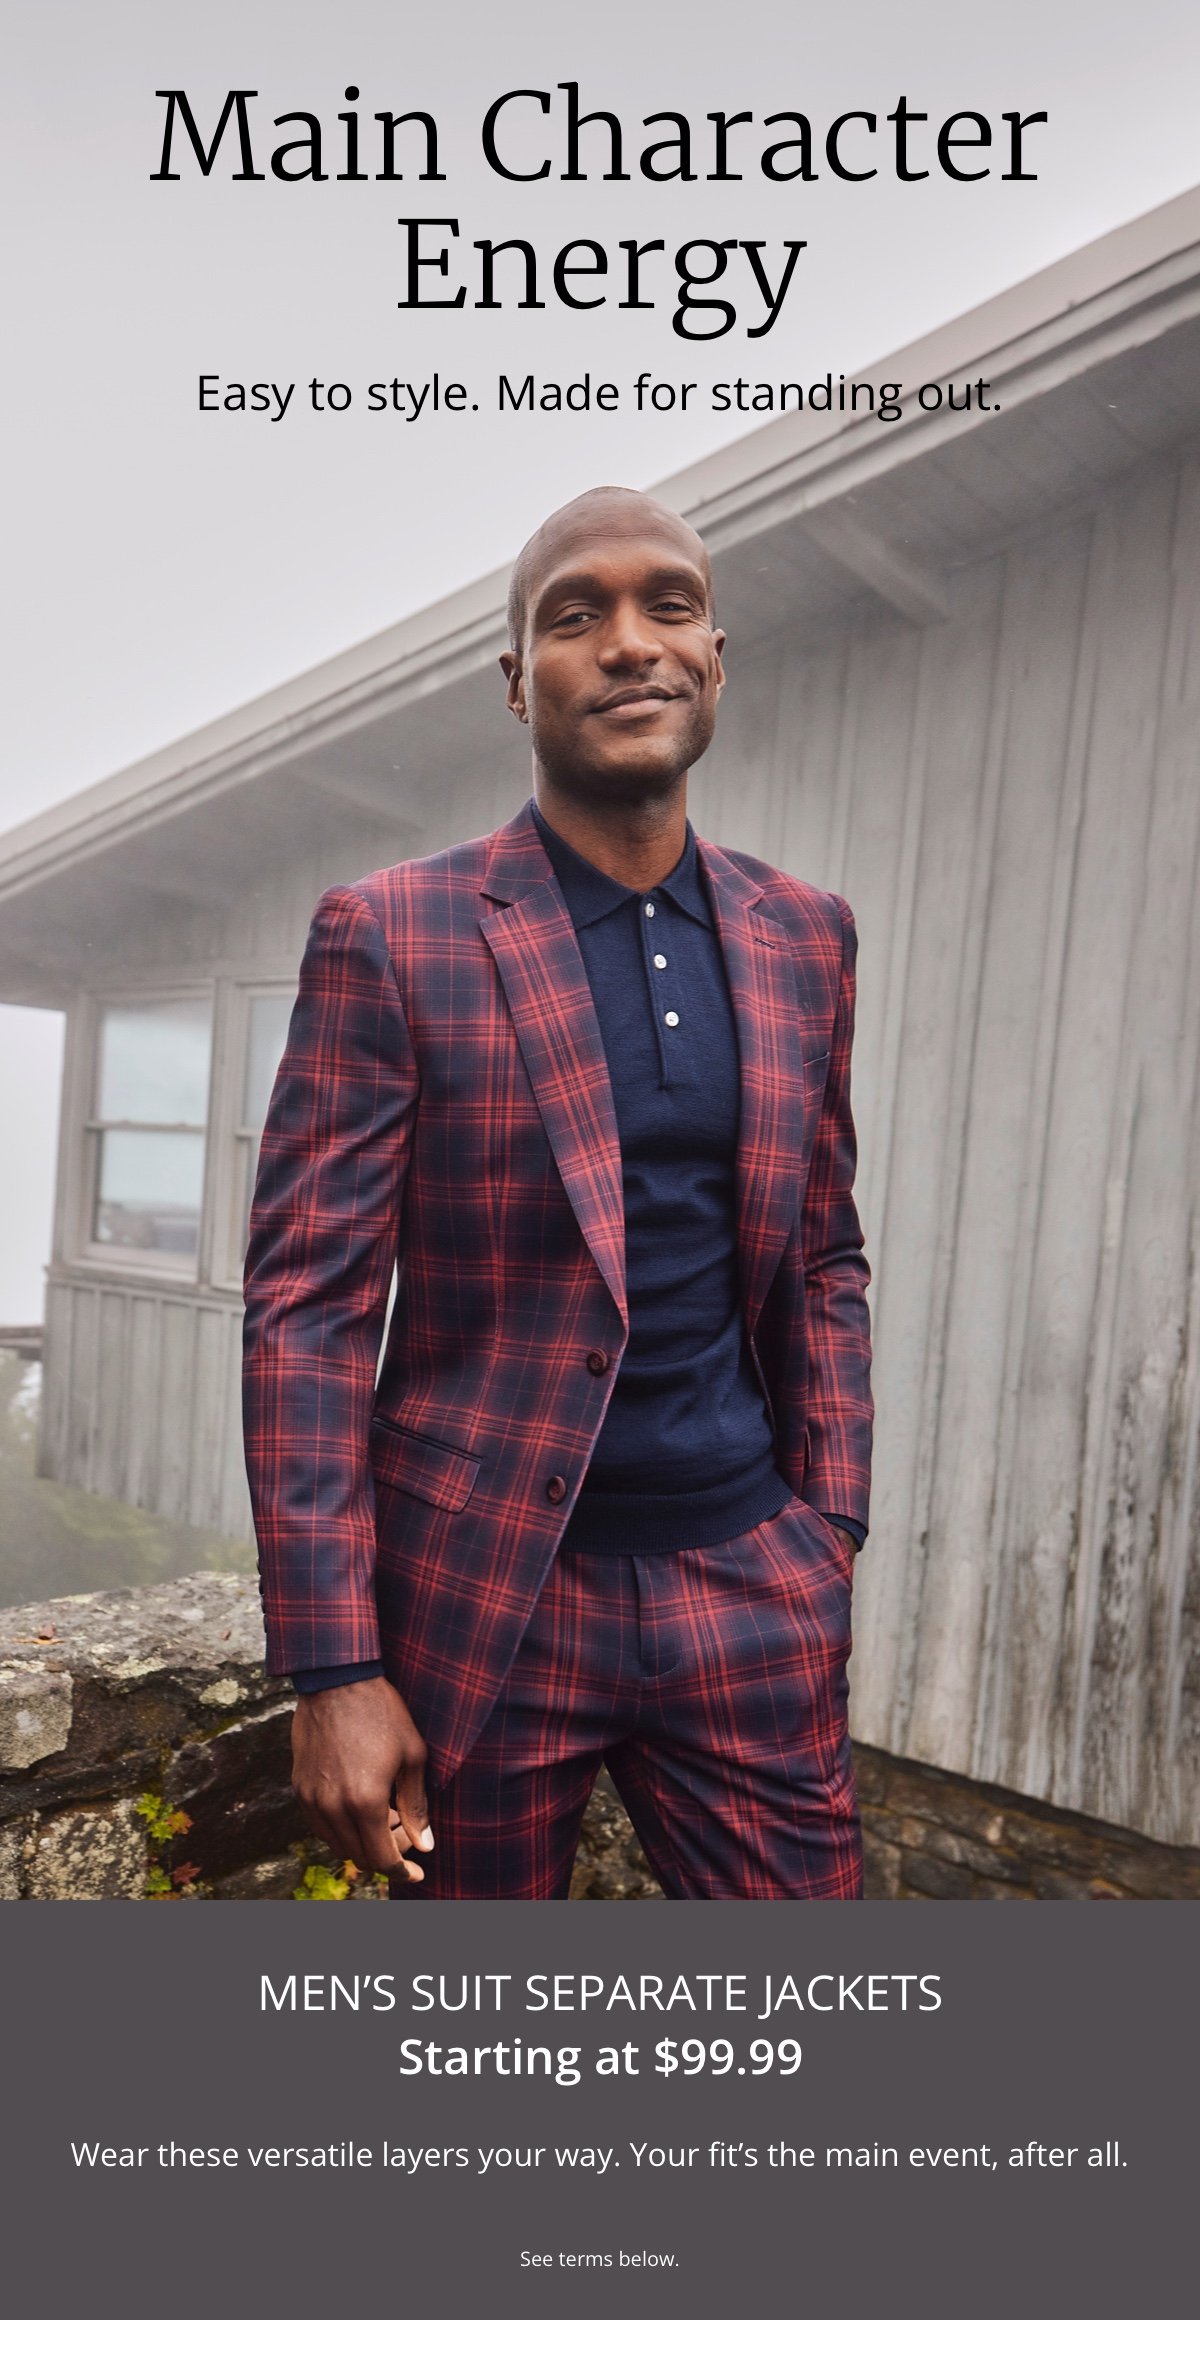 Main Character Energy|Easy to style. Made for standing out.|Men’s Suit Separate Jackets|Starting at \\$99.99|Wear these versatile layers your way. Your fit’s the main event, after all.|See terms below.